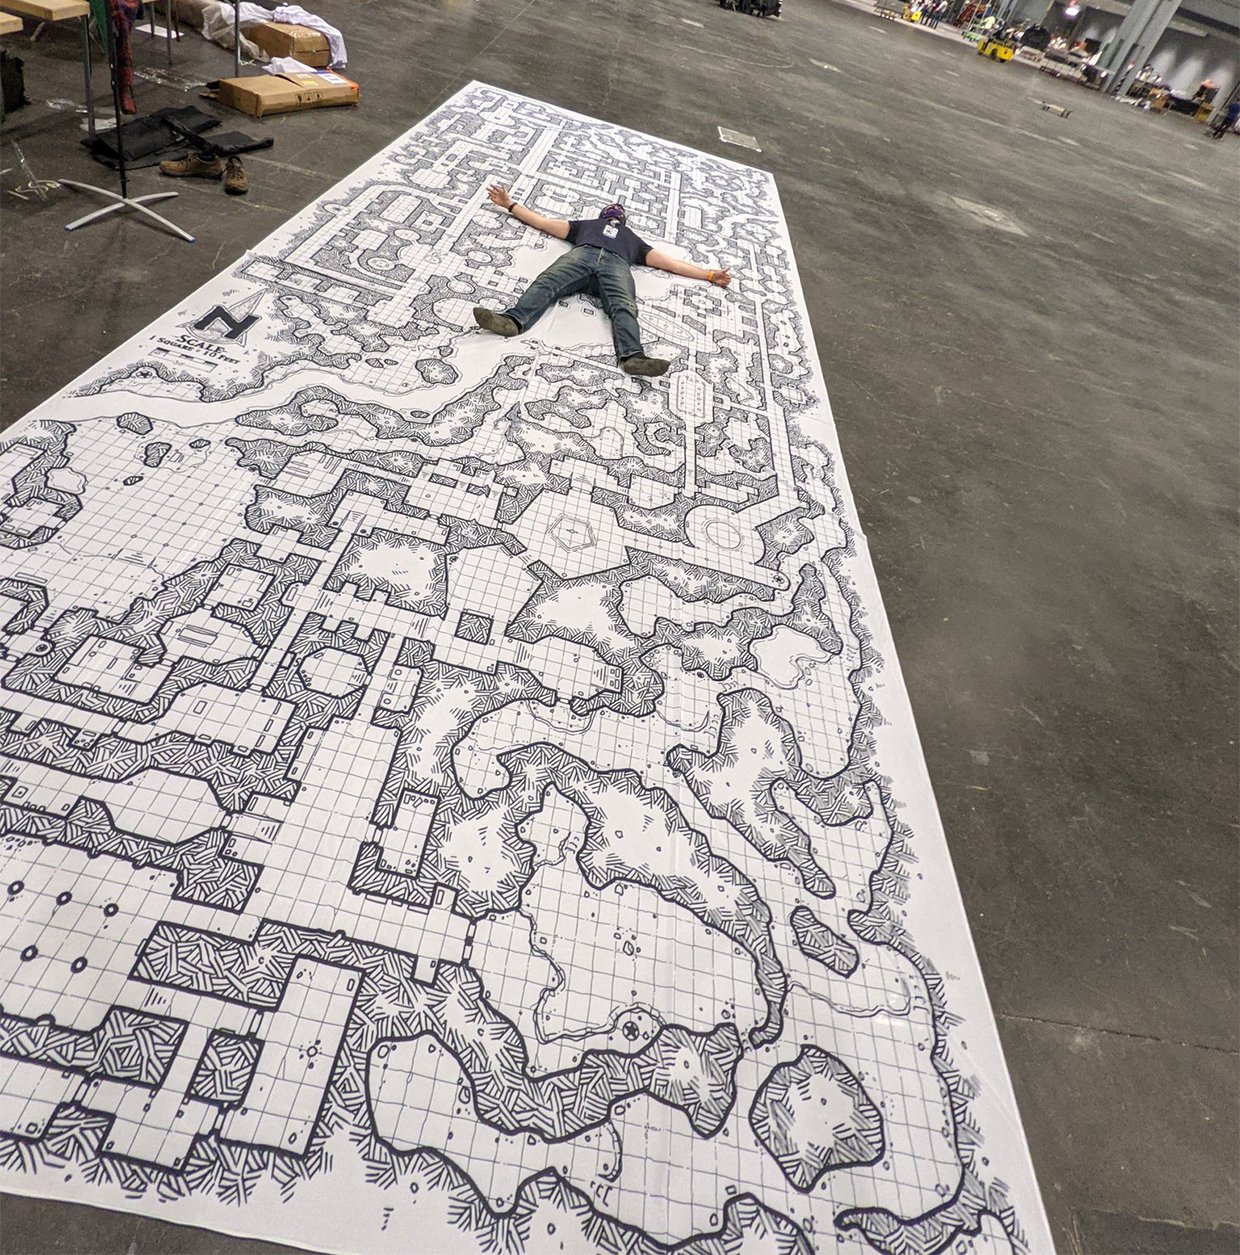 World’s Largest Dungeon Map